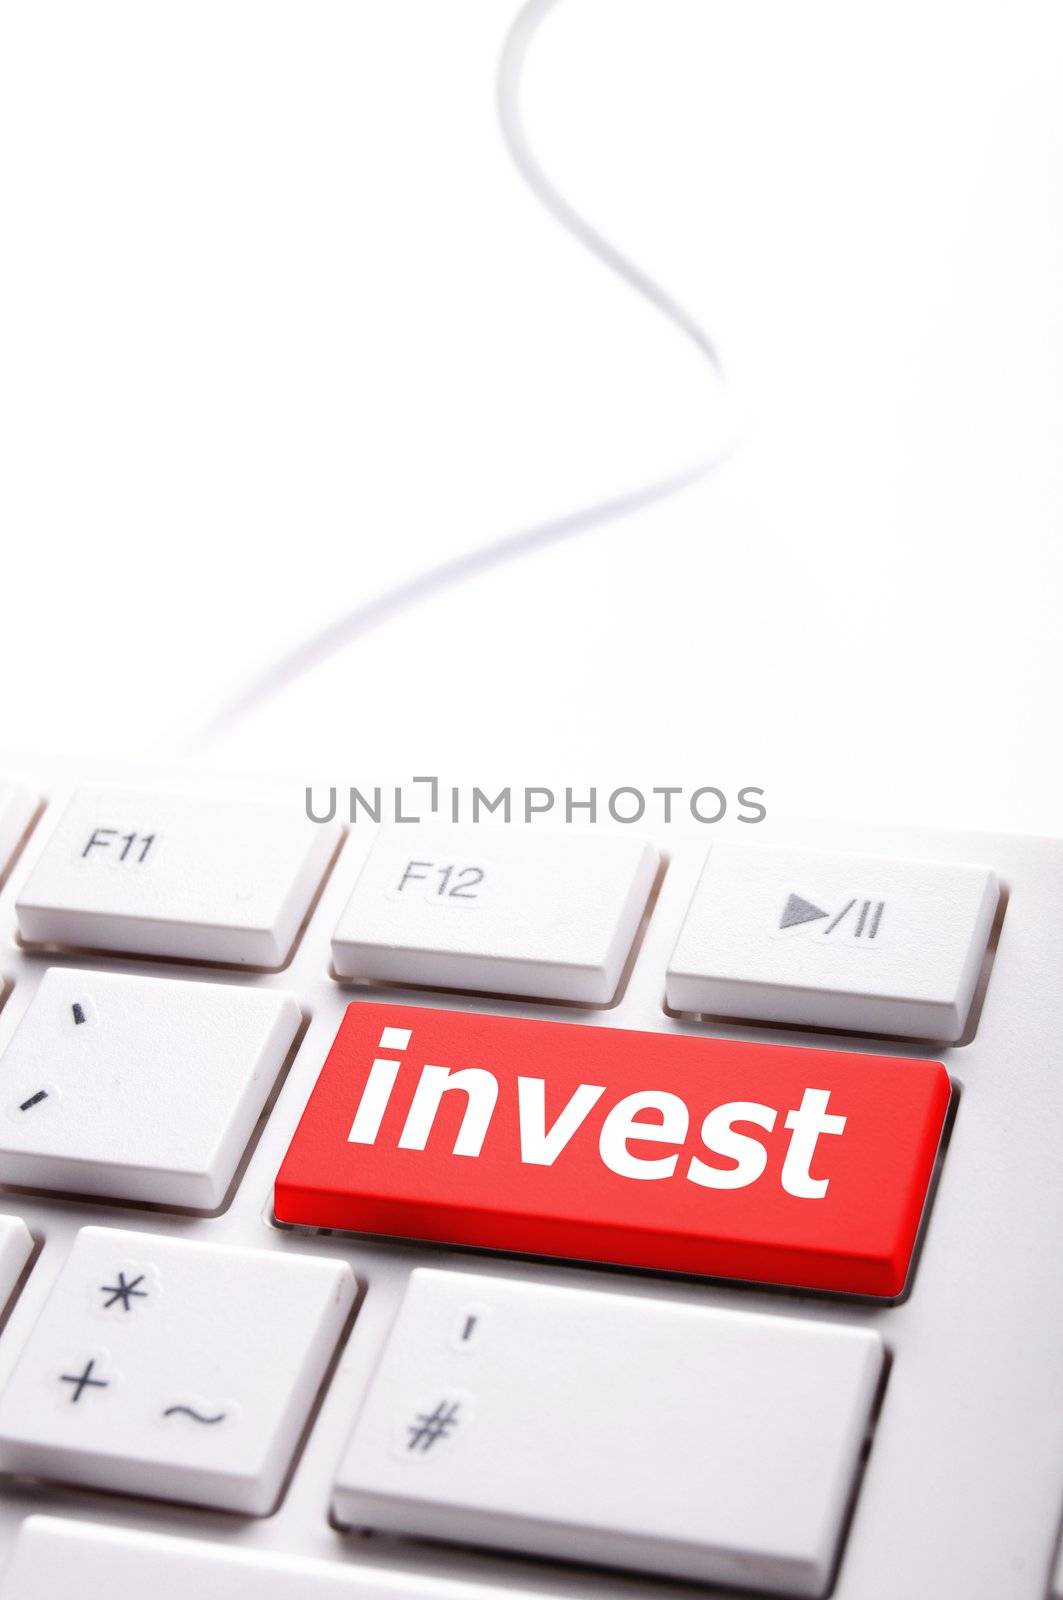 invest or investment key or button in red showing business success